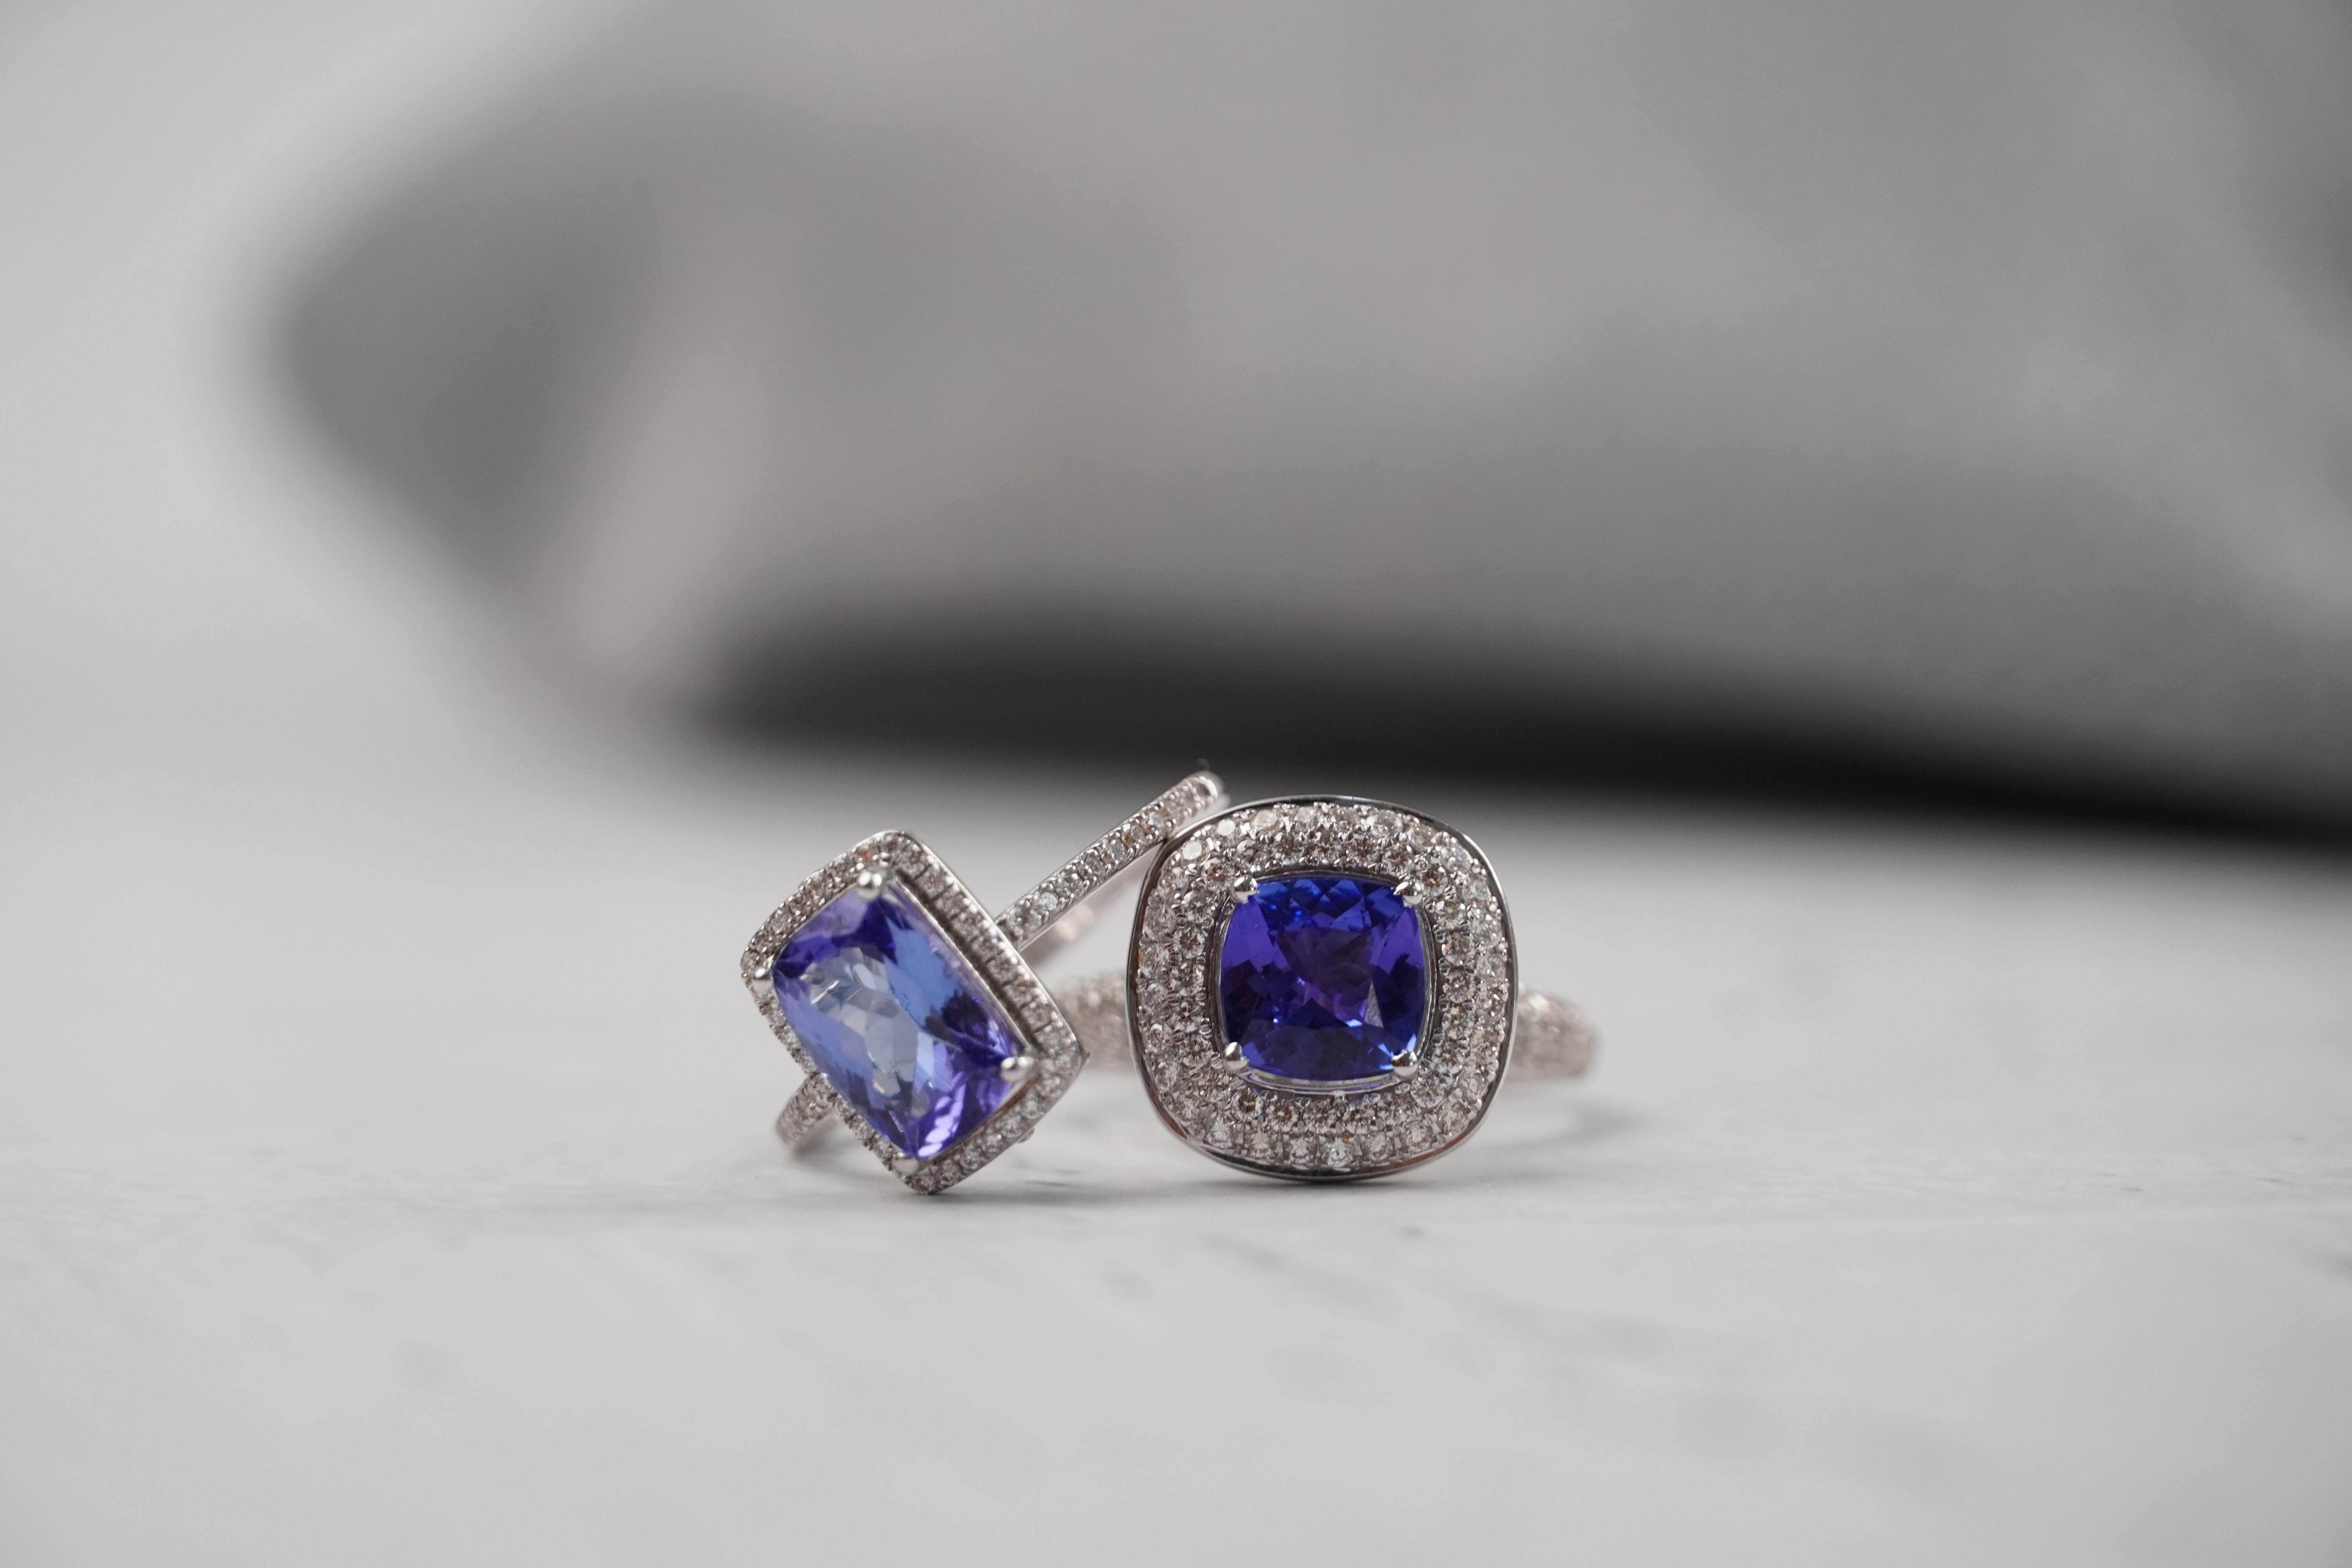 For Sale:  1.76 Carat Tanzanite and Diamond Ring in 18K White Gold 6